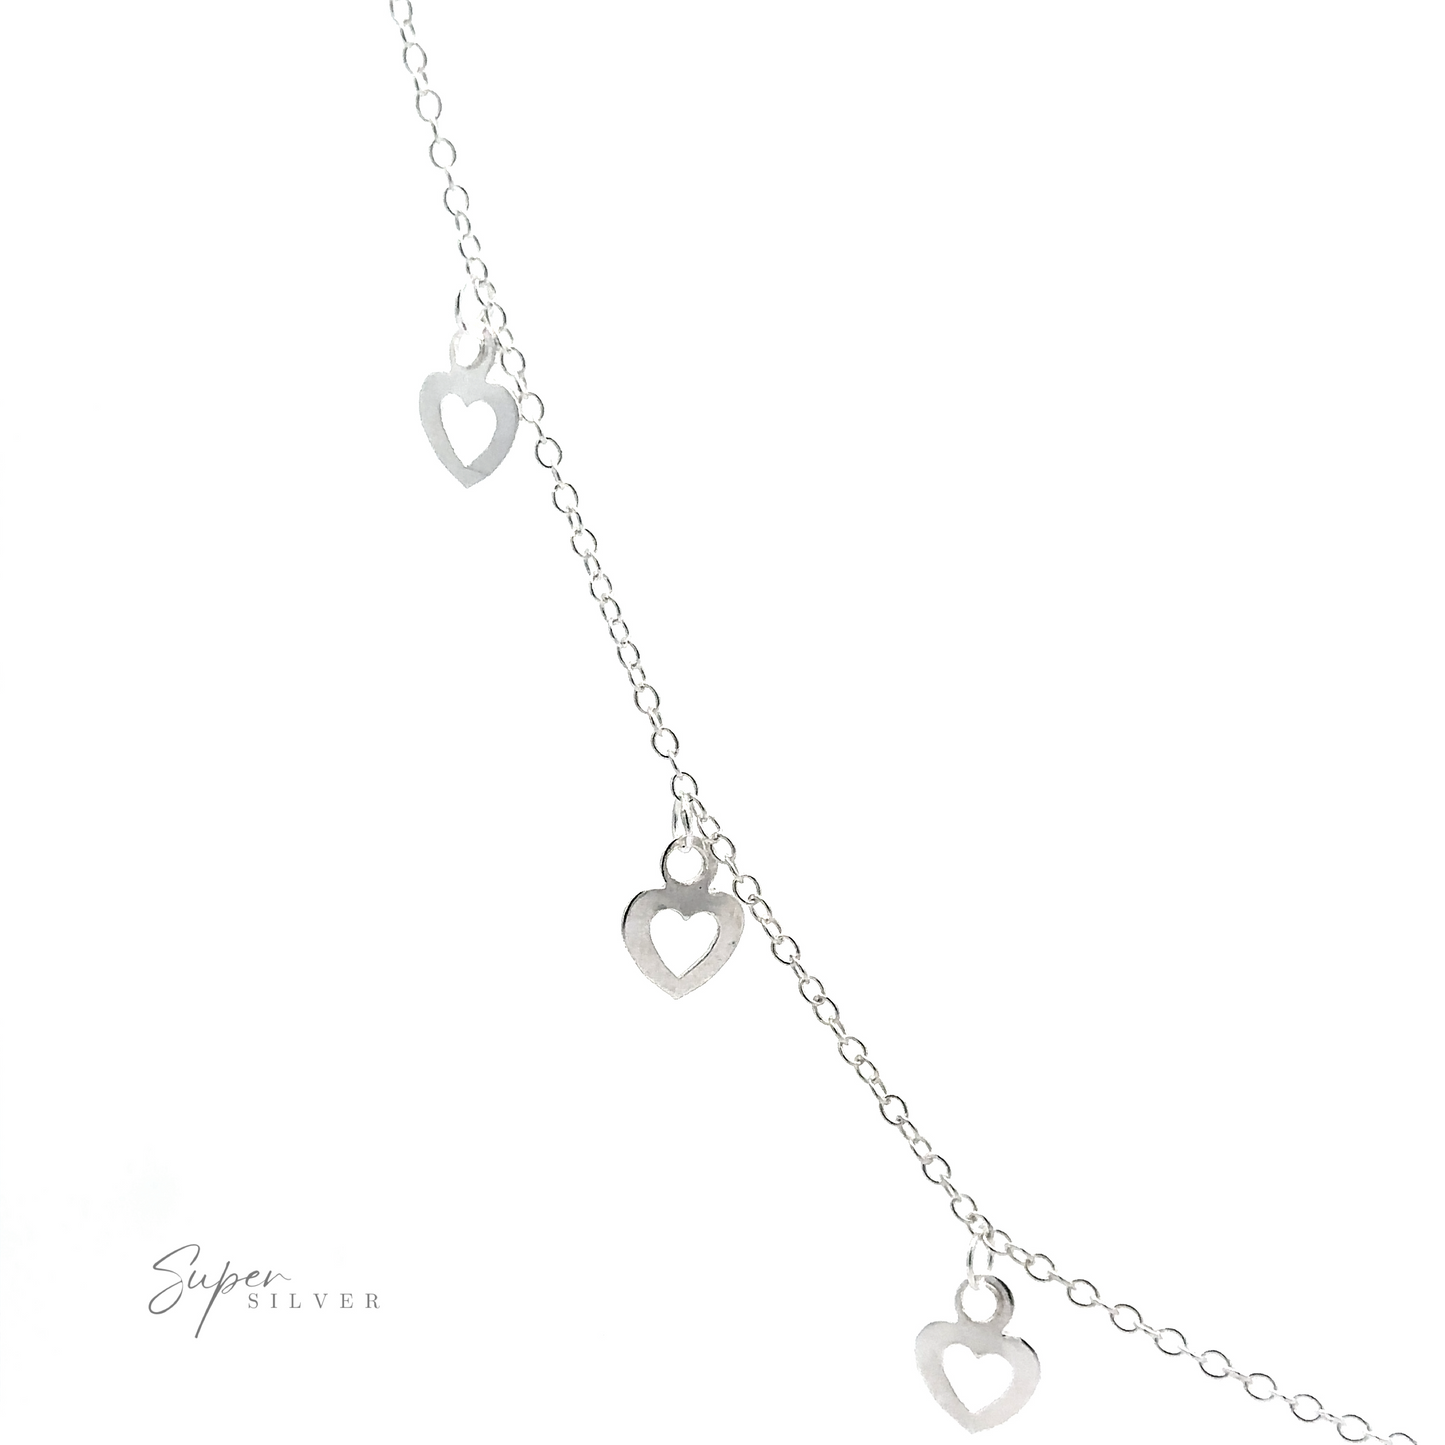 
                  
                    A delicate Silver Open Heart Charm Necklace featuring small open heart charms hanging from it. The name "Super Silver" is faintly visible in the bottom left corner.
                  
                